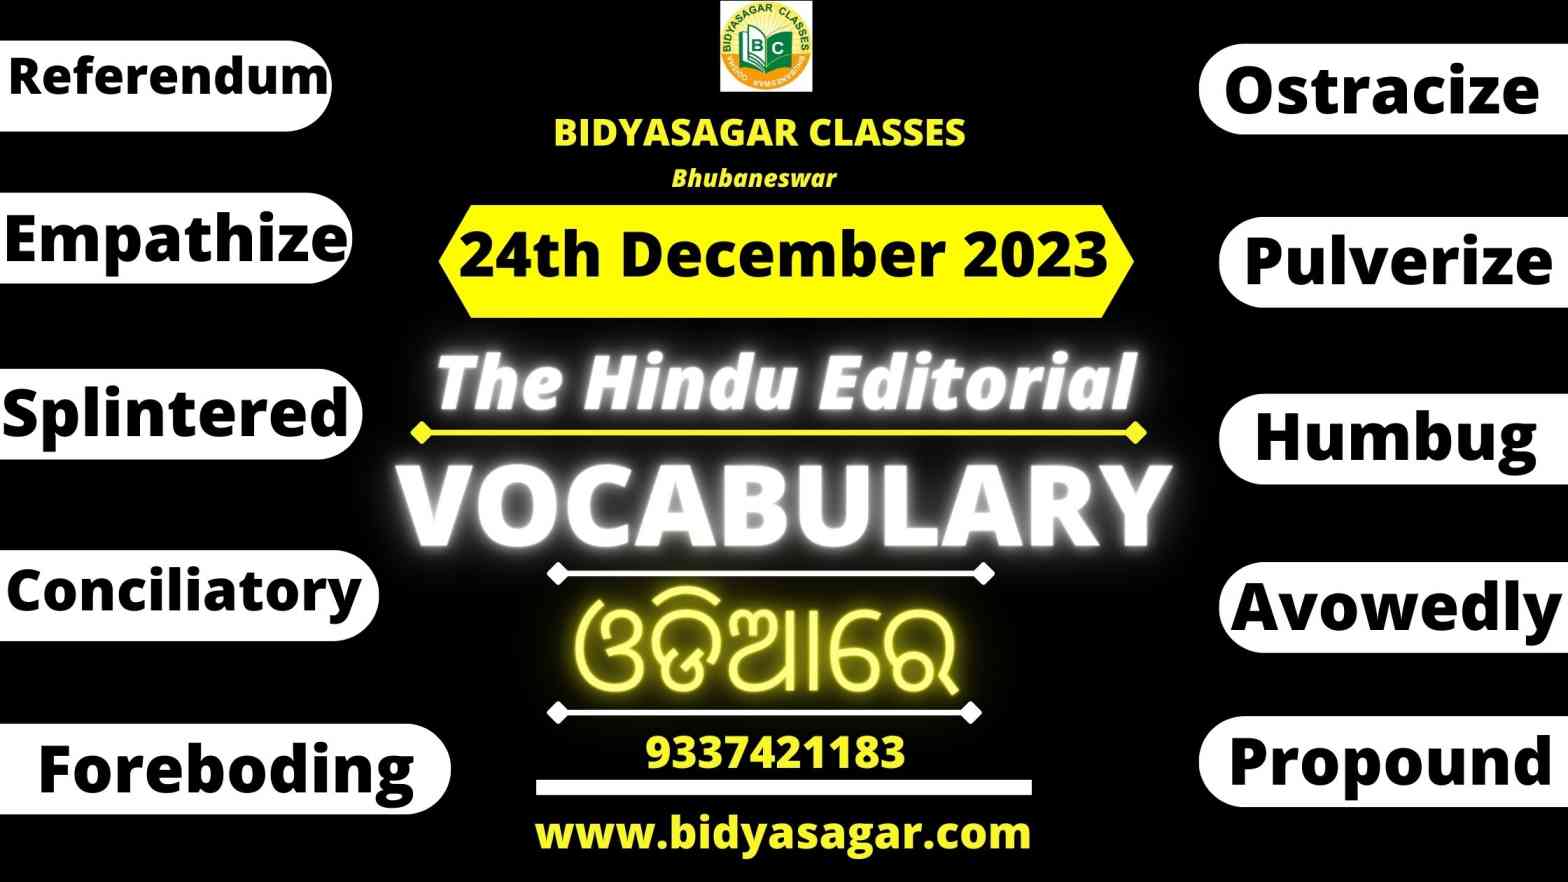 The Hindu Editorial Vocabulary of 24th December 2023